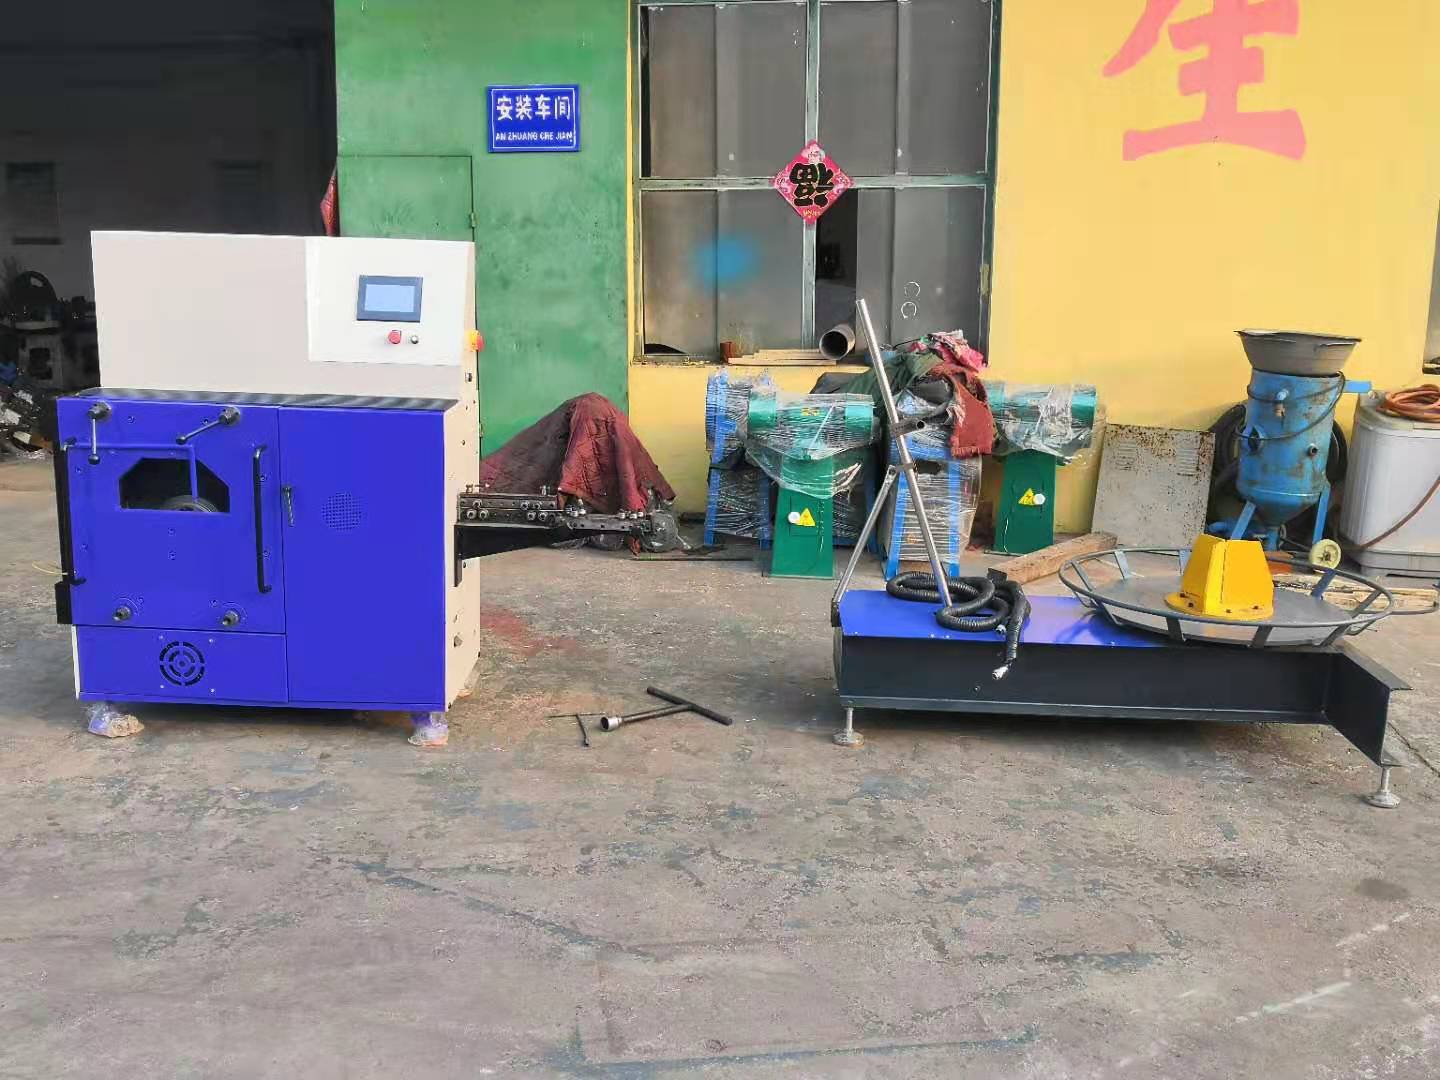 Cheap high speed automatic <a href=https://www.nailwiremachine.com/Automatic-steel-wire-nail-making-machine-Z94-1C-p.html target='_blank'><a href=https://www.nailwiremachine.com/Automatic-steel-wire-nail-making-machine-Z94-1C-p.html target='_blank'>steel wire nail machine</a></a> factory